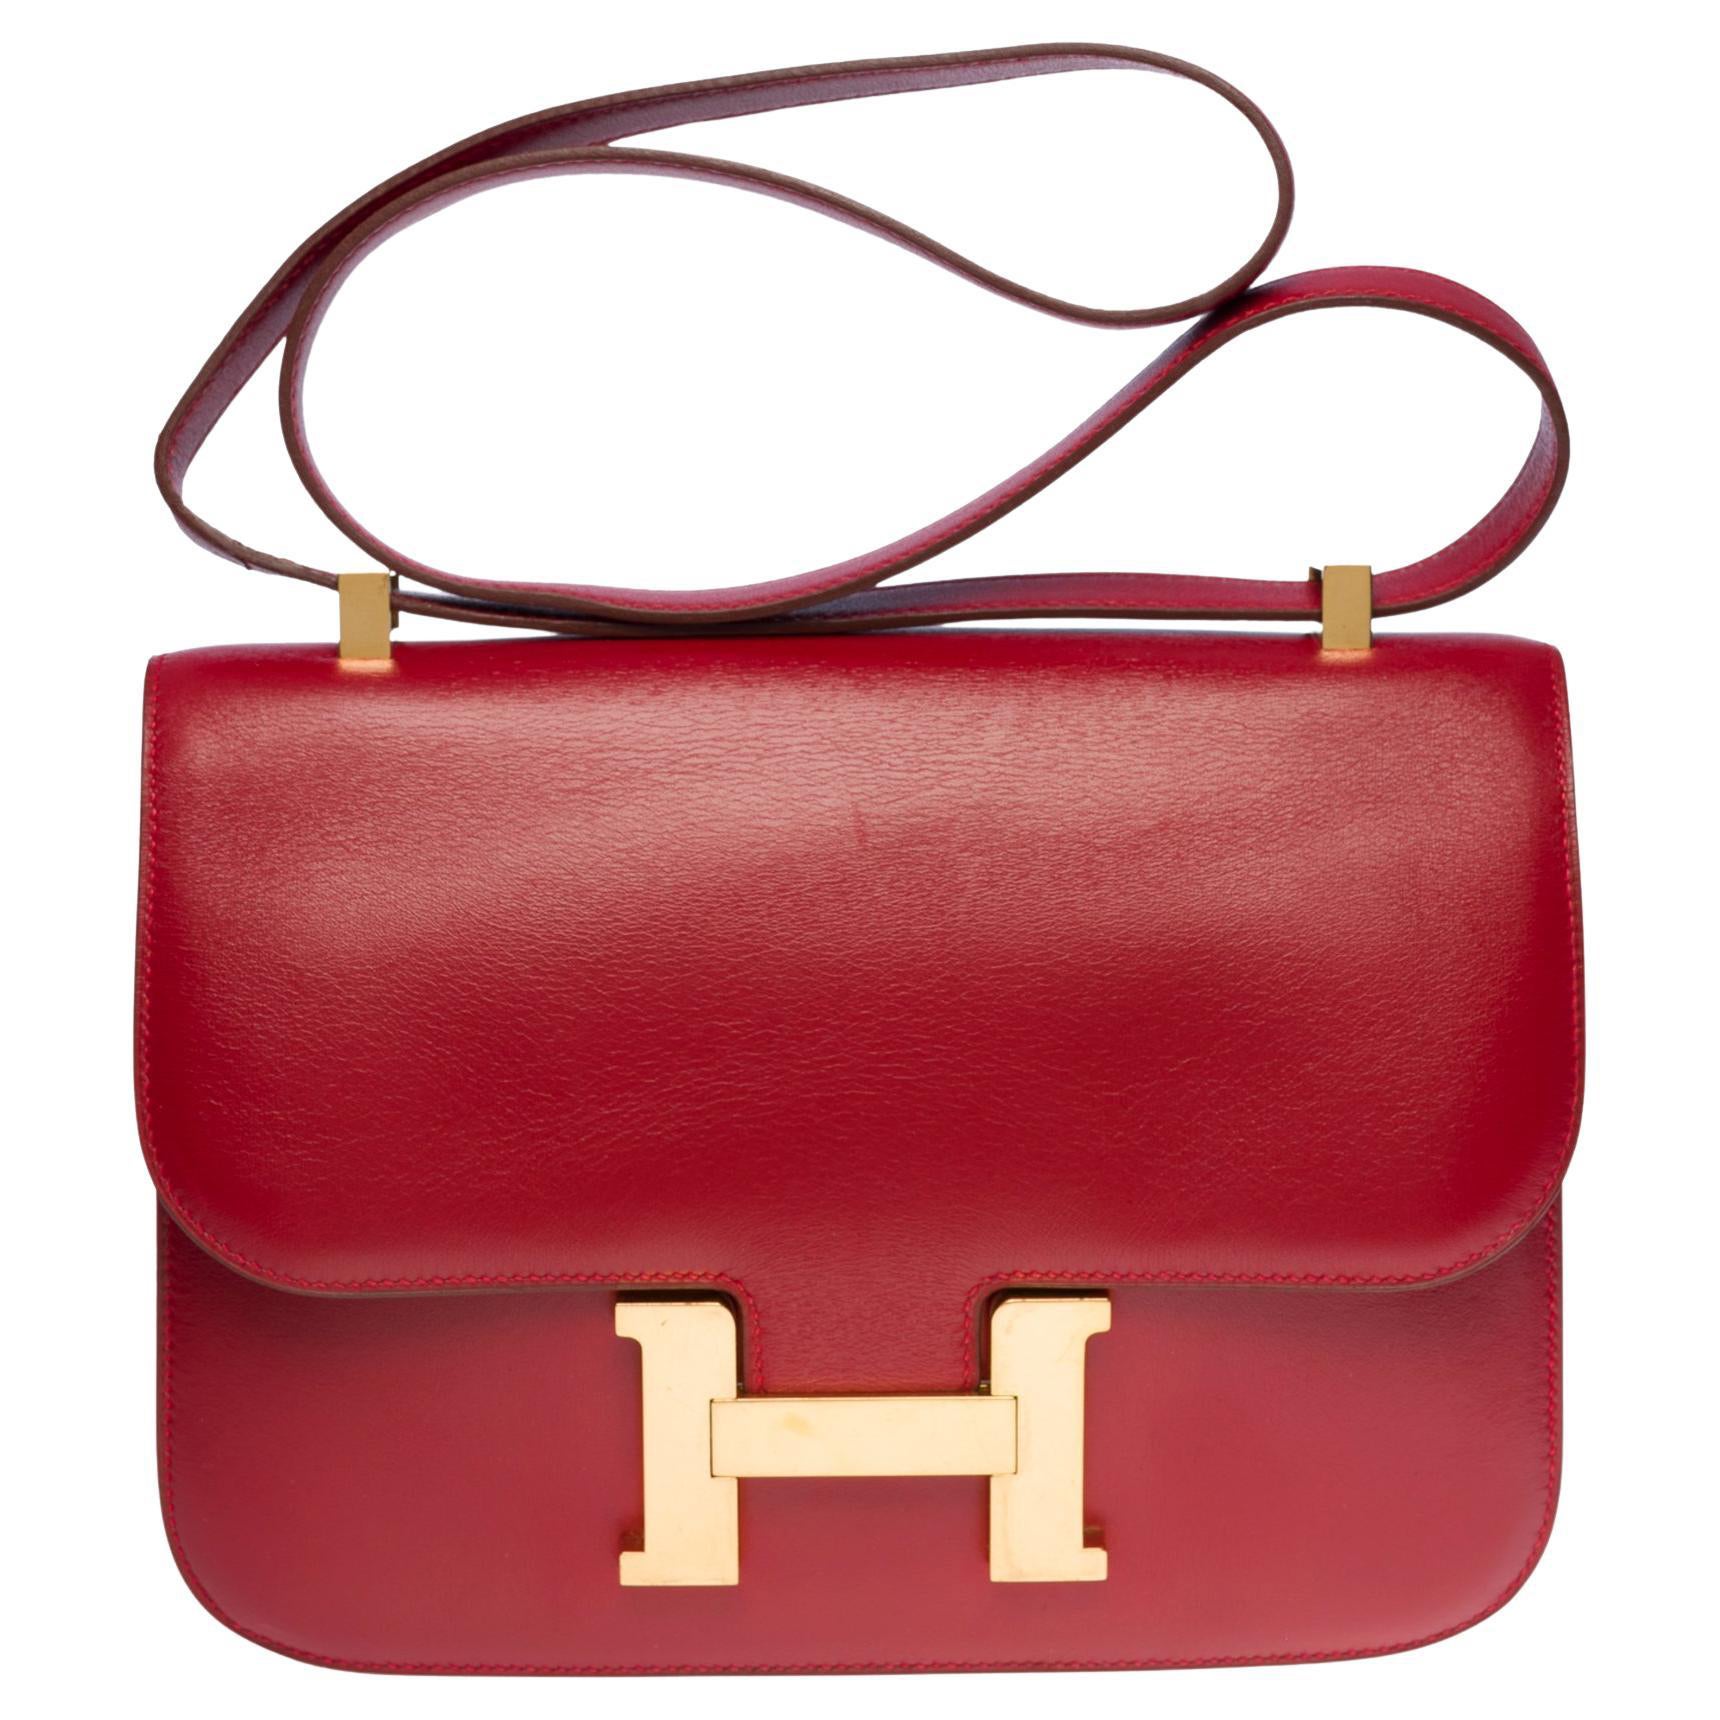 Stunning Hermes Constance 23 shoulder bag in Rouge H boxcalf leather, GHW For Sale